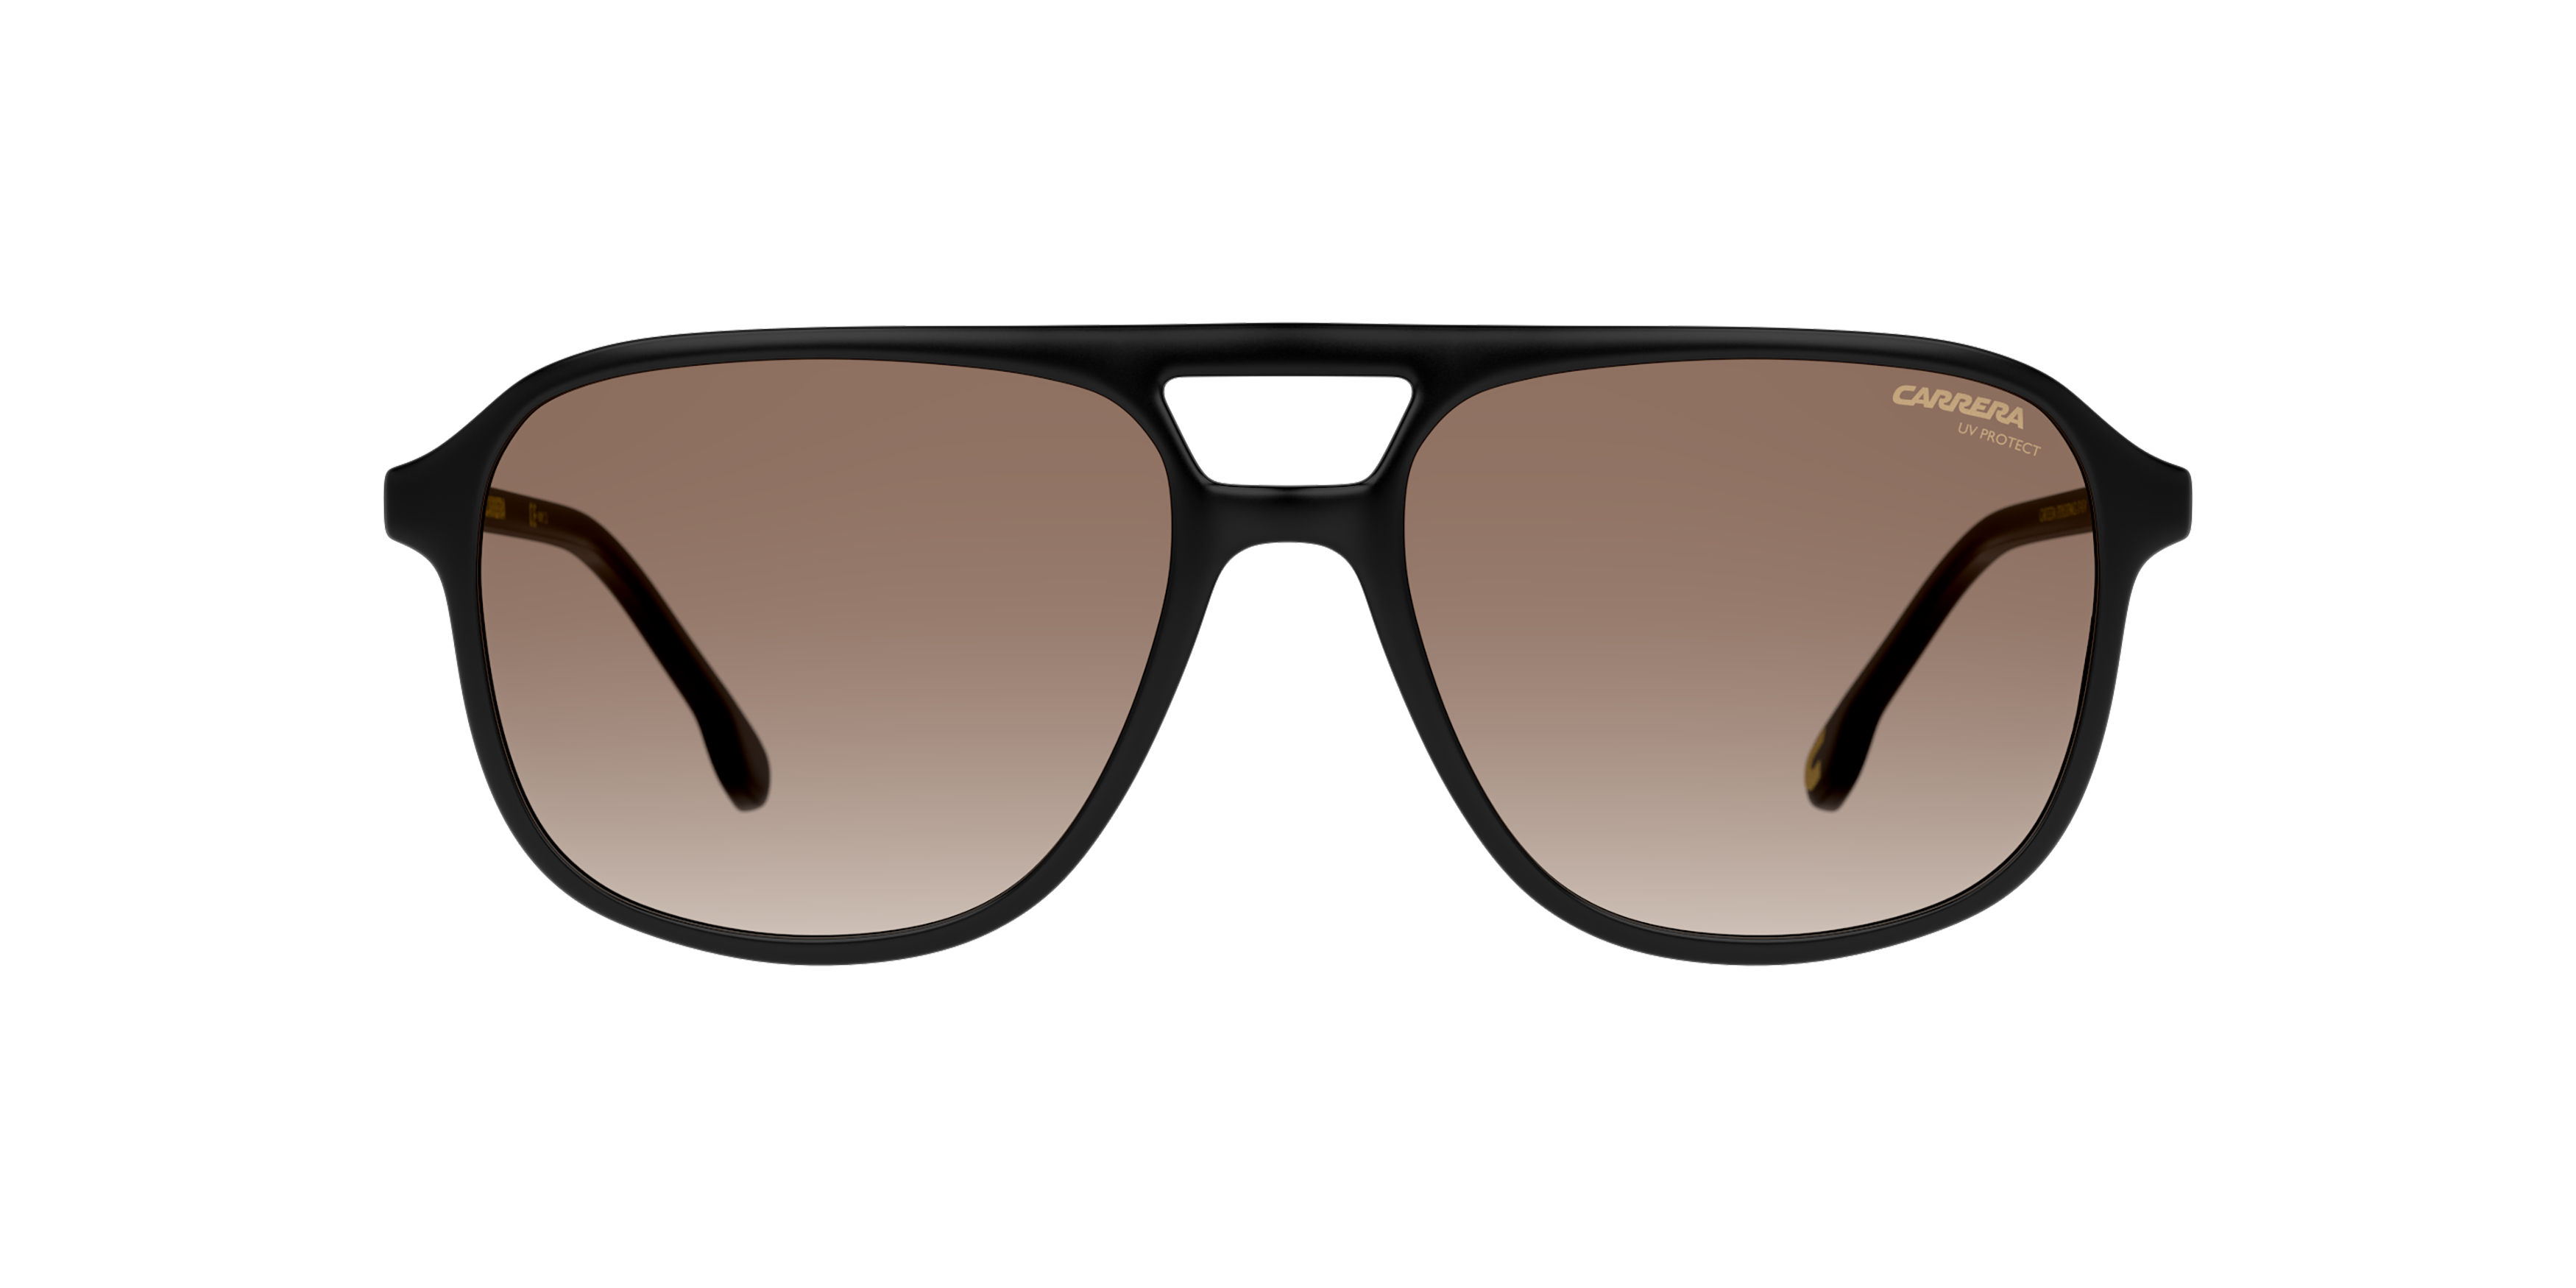 [products.image.front] Carrera CARRERA 173/N/S 807